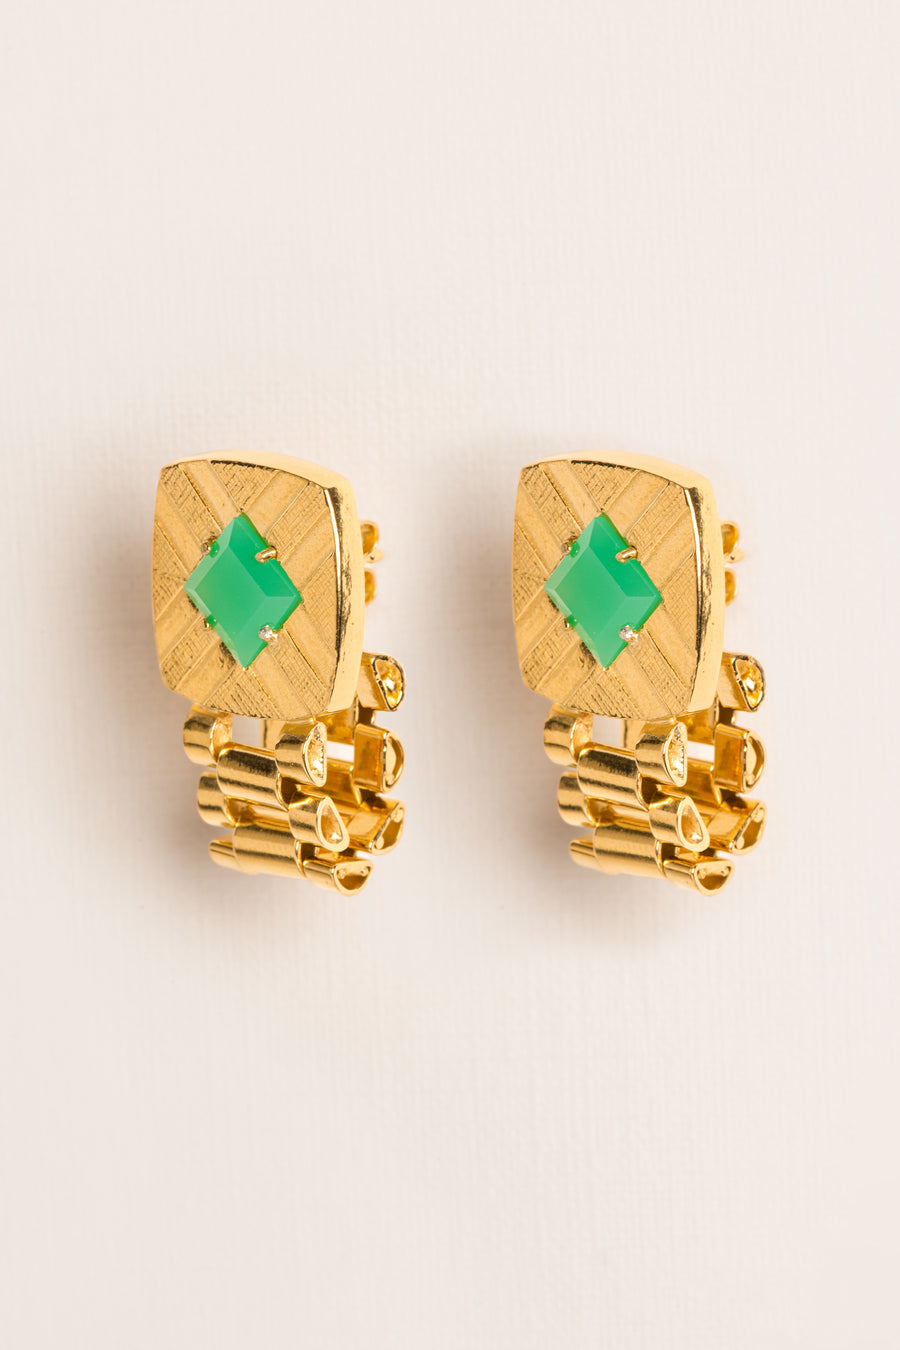 Wouters & Hendrix - Cufflink and Watch Chain Stud Earrings with Green Chrysoprase in Gold